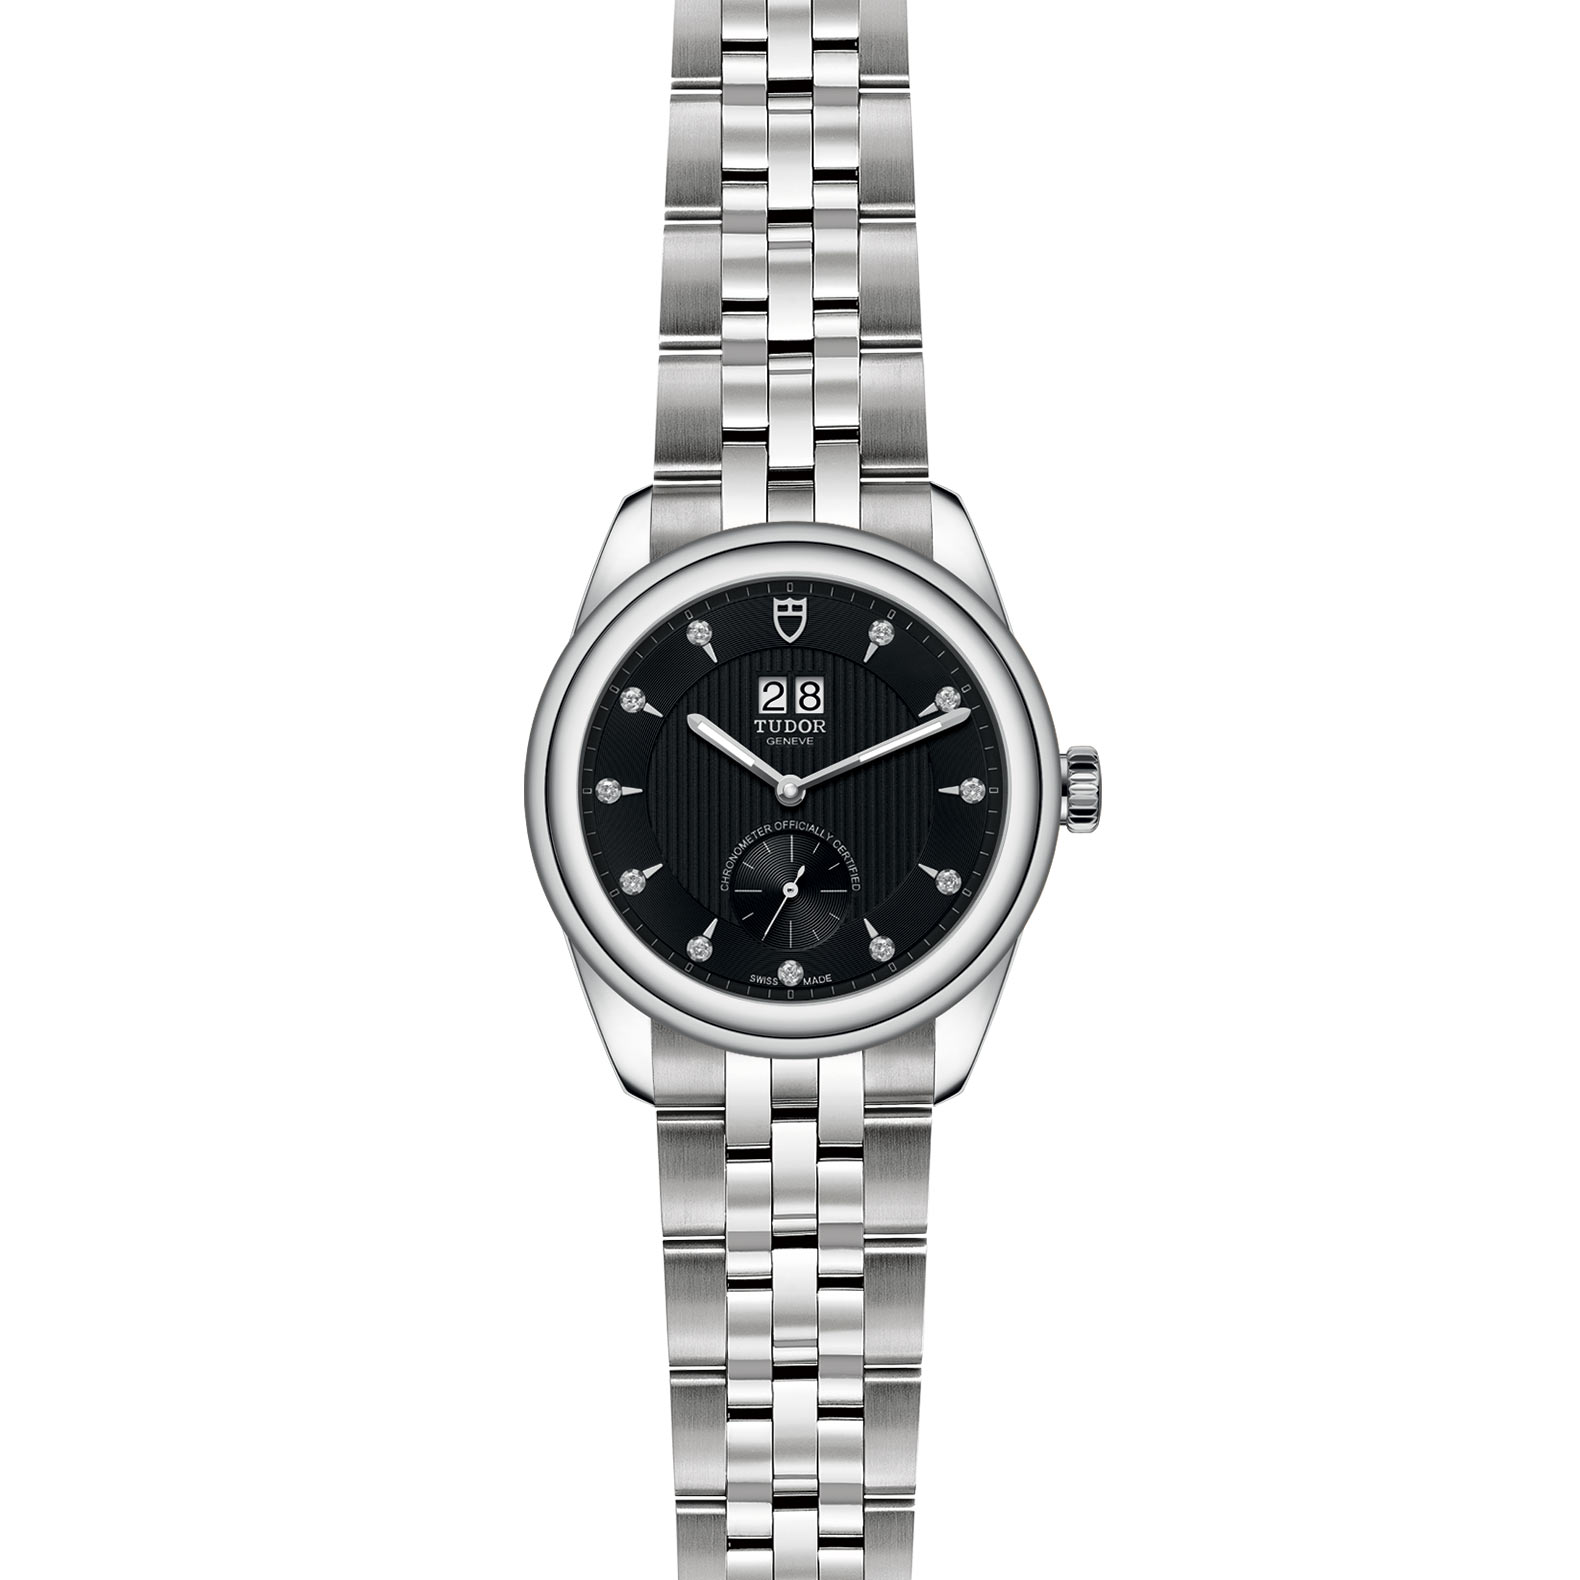 TUDOR Glamour Double Date M57100 0004 Frontfacing